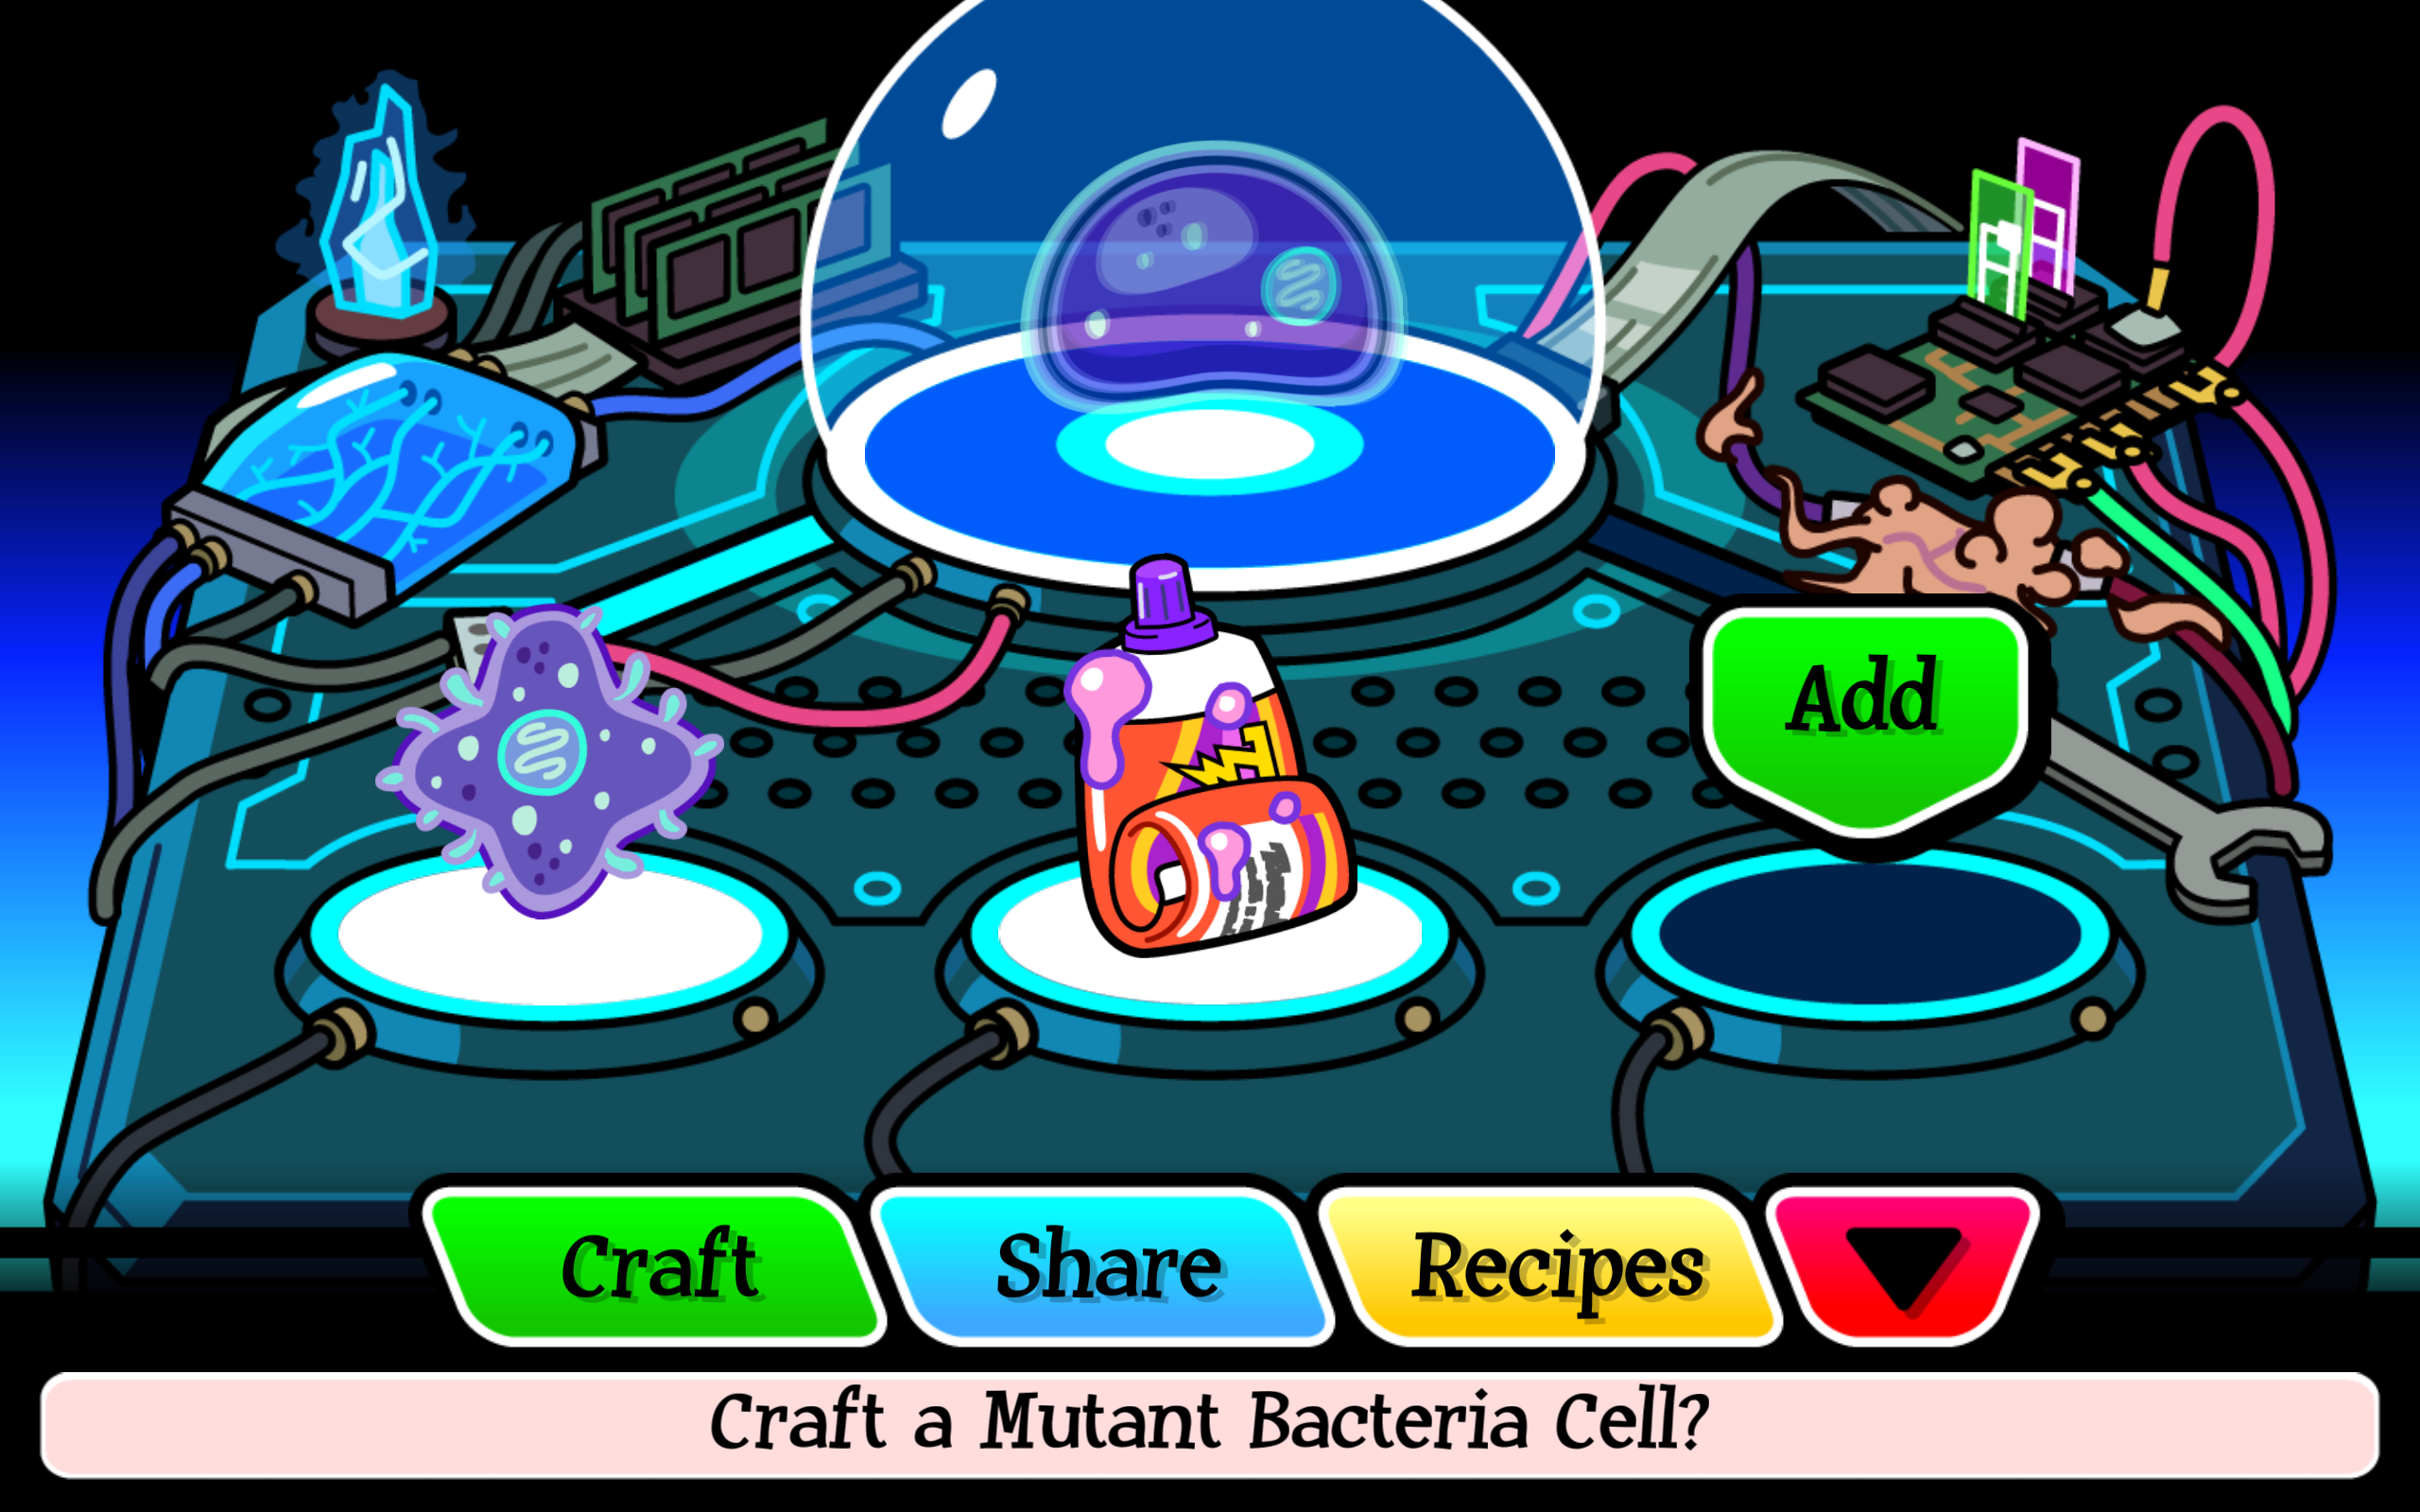 15. Mutant Bacteria Cell